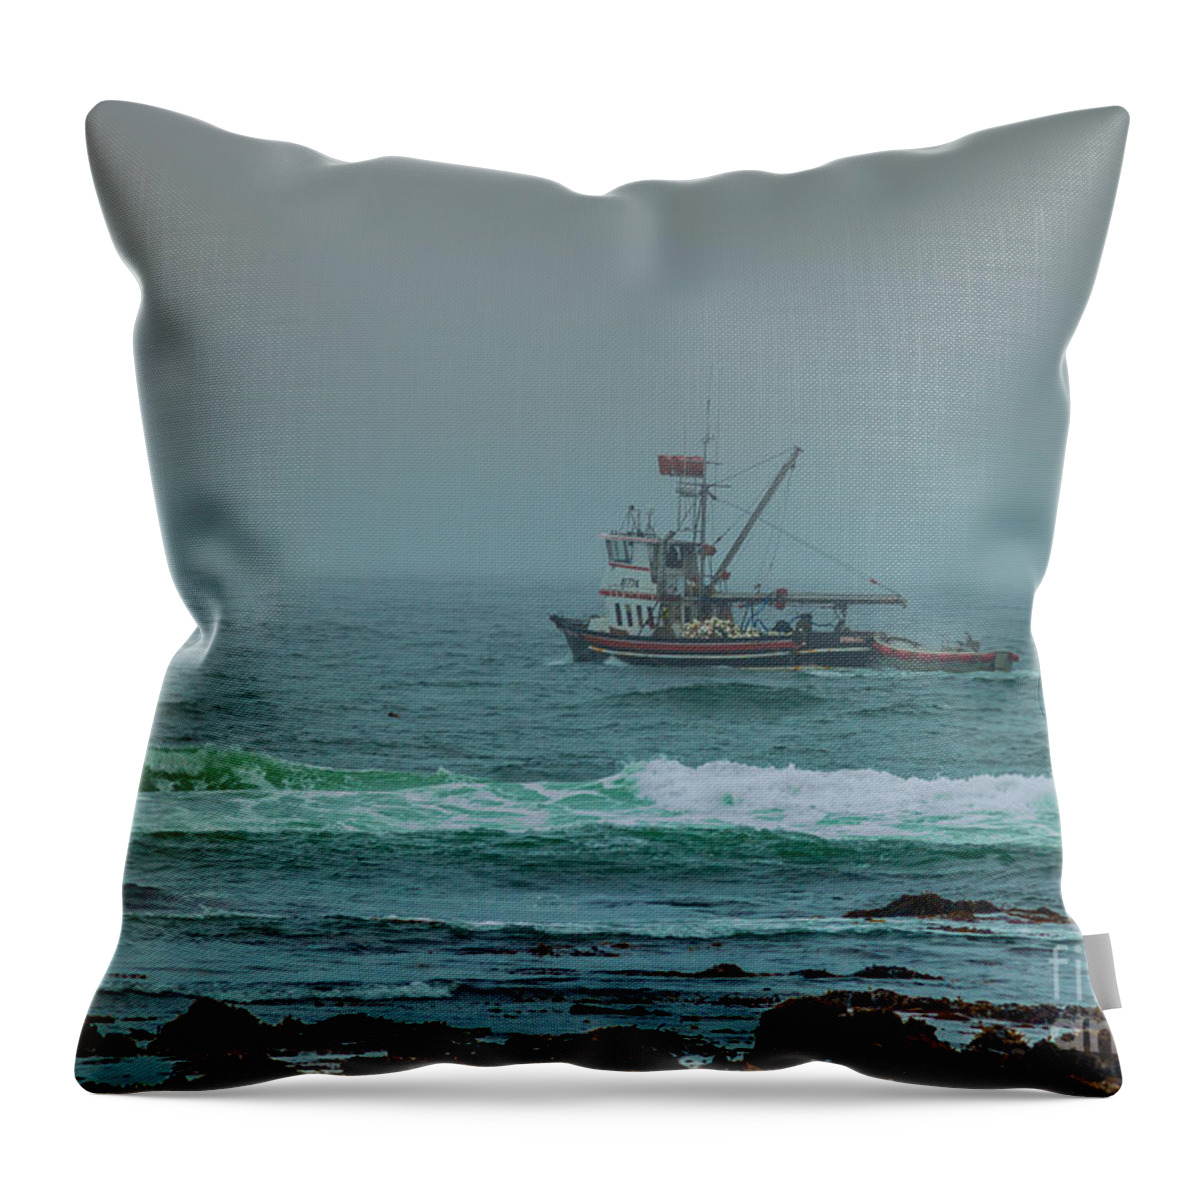 Landscape Throw Pillow featuring the photograph Heading Out #1 by Steven Reed